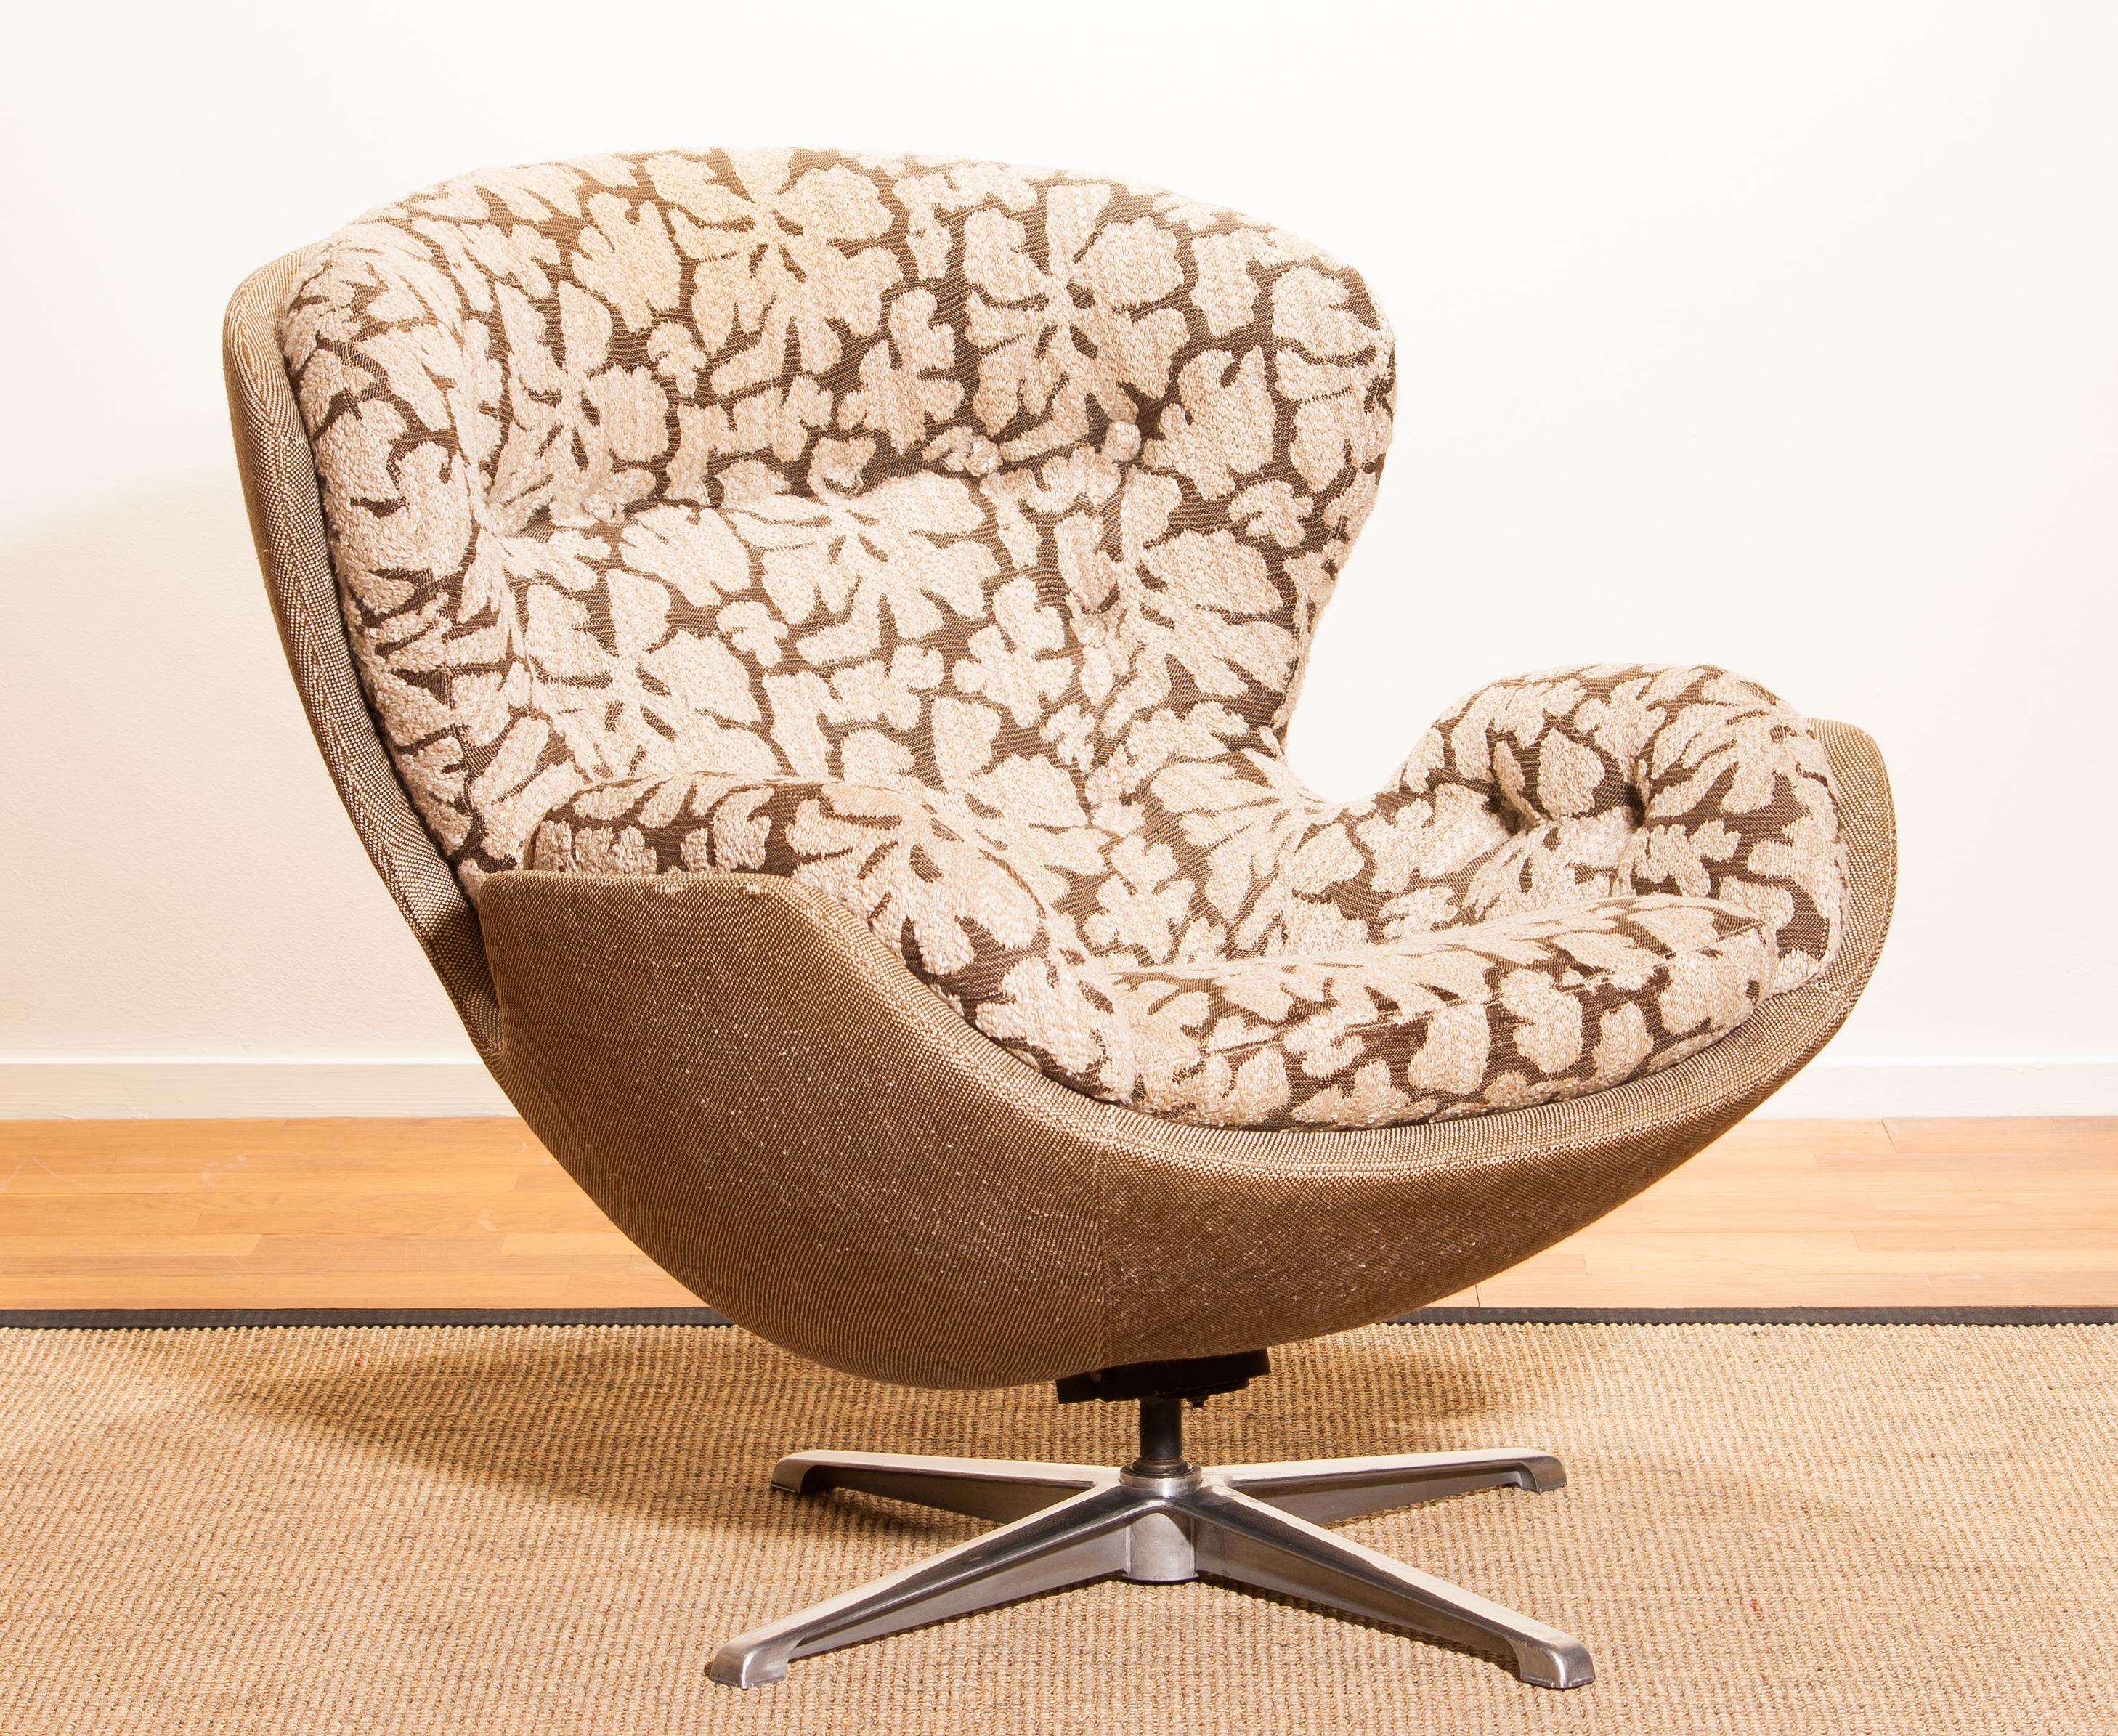 Beautiful swivel lounge chair designed by Lennart Bender for Ulferts Möbler, Sweden.
This comfortable chair is made of a steel swivel frame with an original fabric upholstered seating.
Period, 1970s
Dimensions: H 90 cm, W 82 cm, D 95 cm.